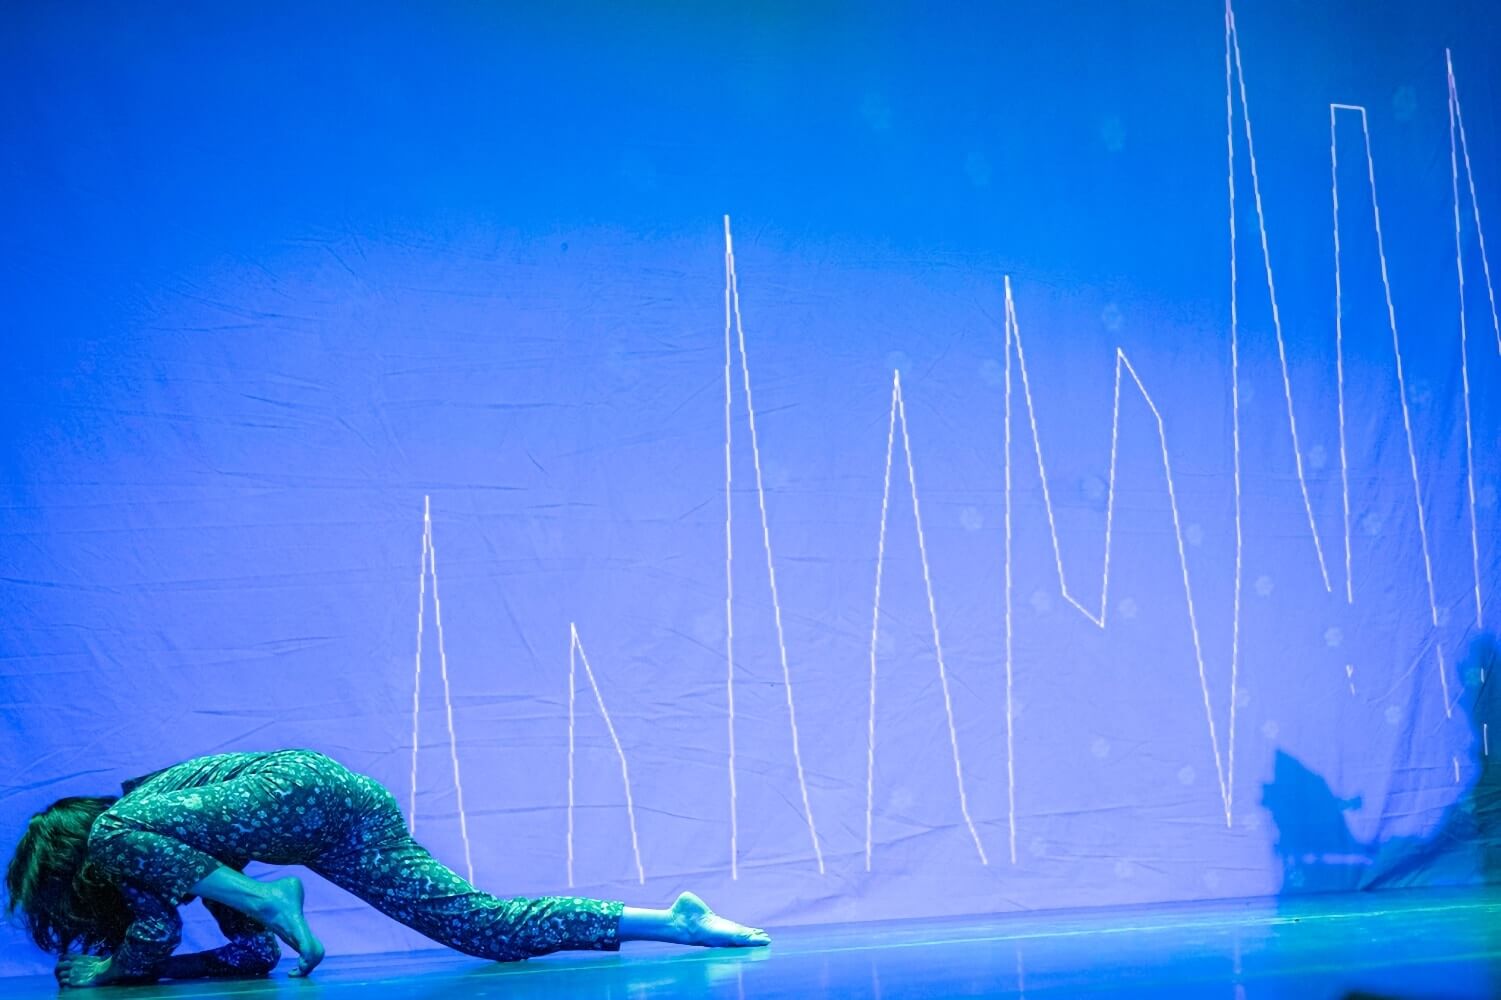 A figure in a patterned bodysuit moves across the stage from right to left in a stylized and elongated crawling pose, with their body and face close to the stage. They are lit in blue and green lights, and the blue backdrop behind them is illuminated with a brighter light, upon which is projected in thin white lines what look like the jagged spikes of a graph or ongoing measurement similar to an EKG.